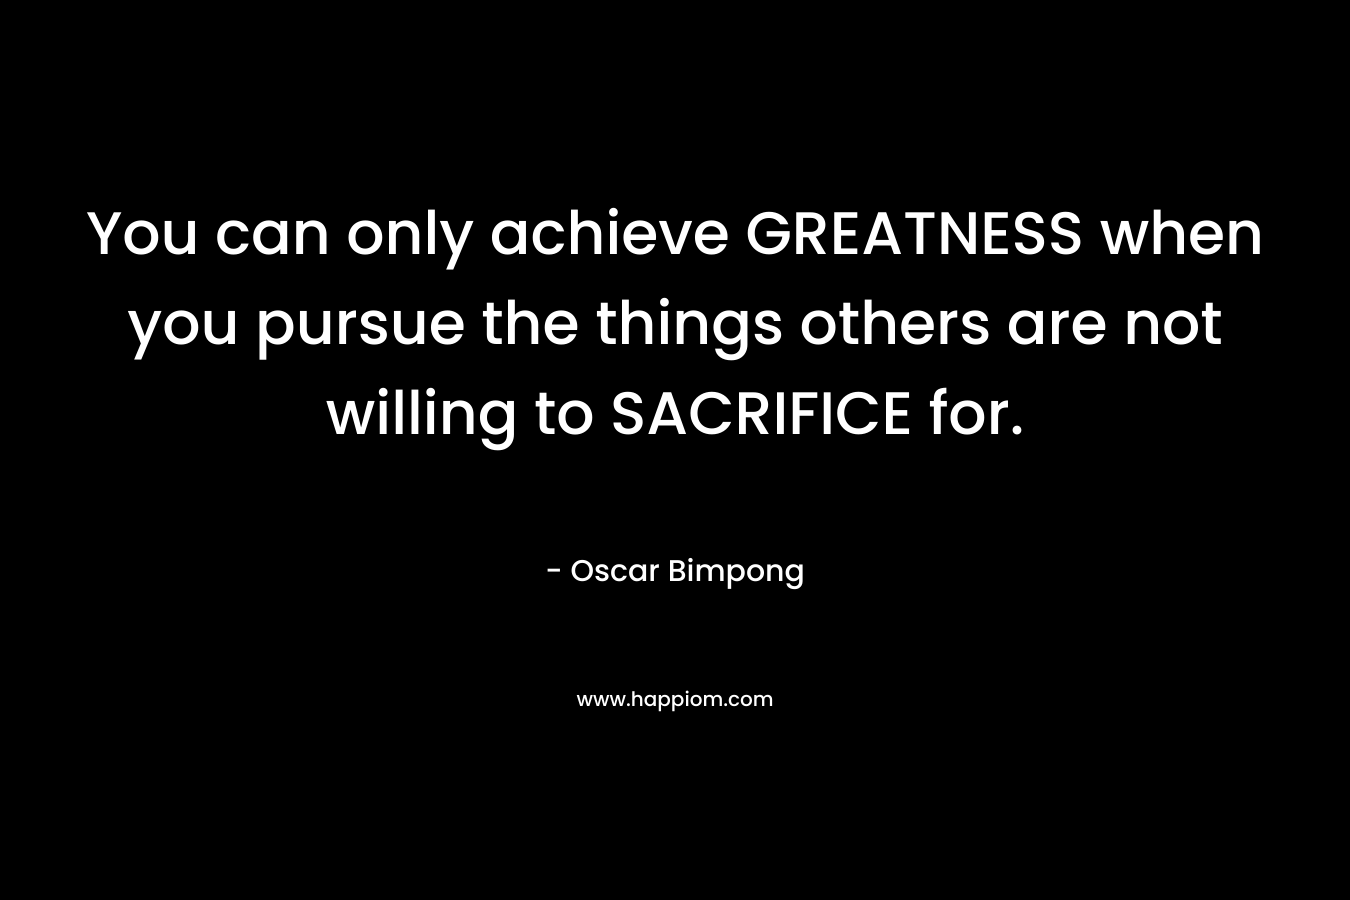 You can only achieve GREATNESS when you pursue the things others are not willing to SACRIFICE for. – Oscar Bimpong